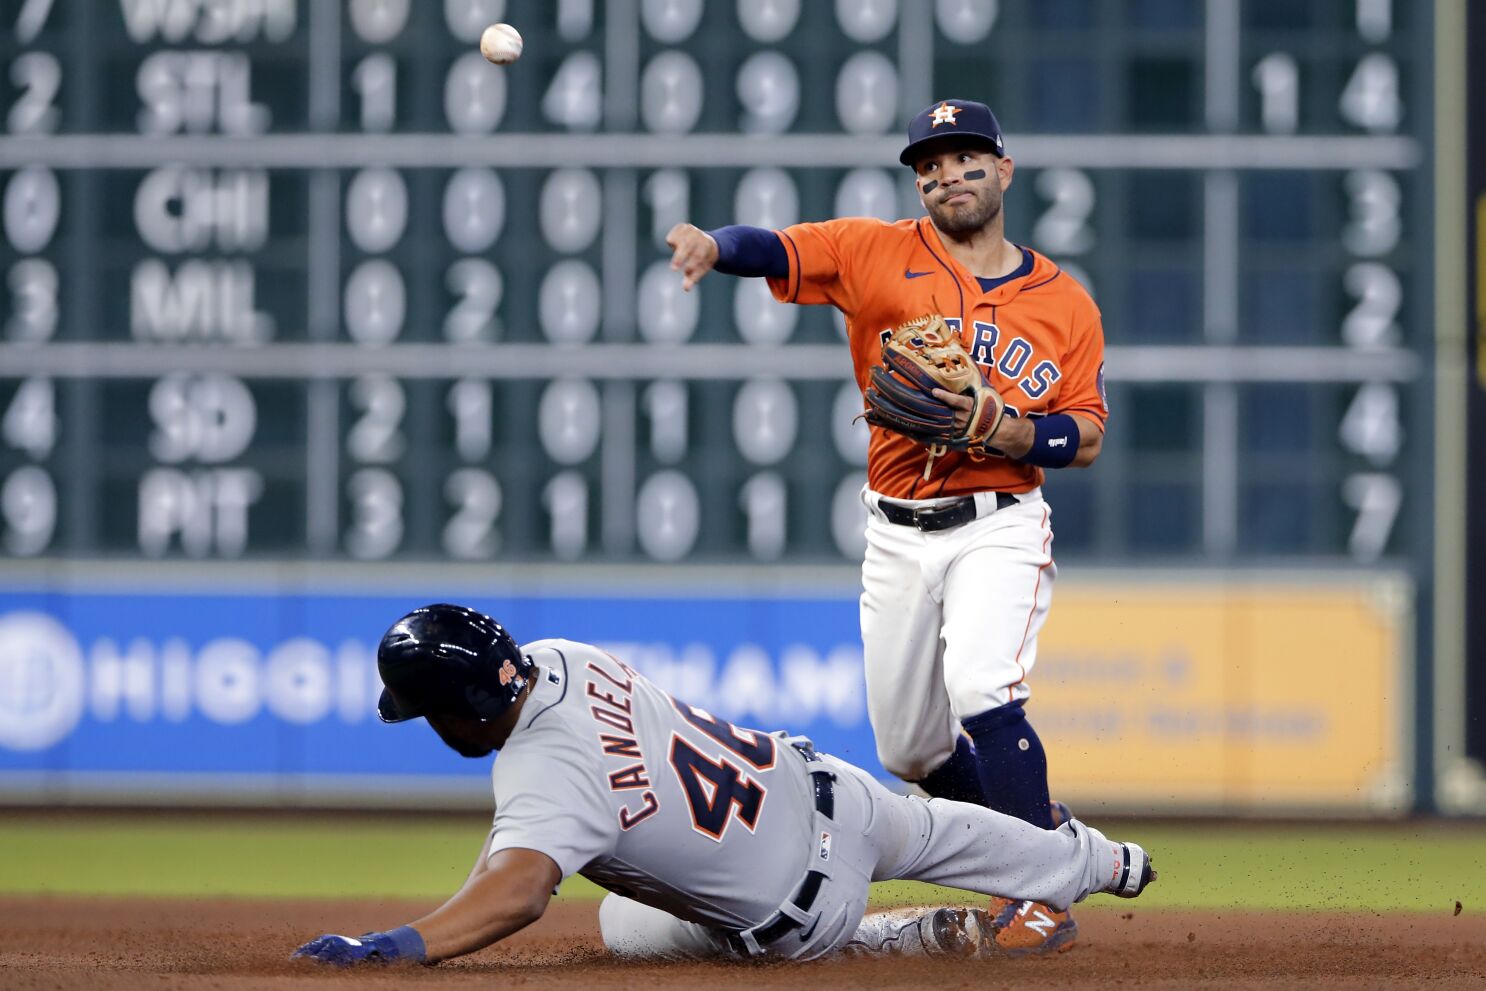 Five Astros players land on injured list because of COVID-19 protocols